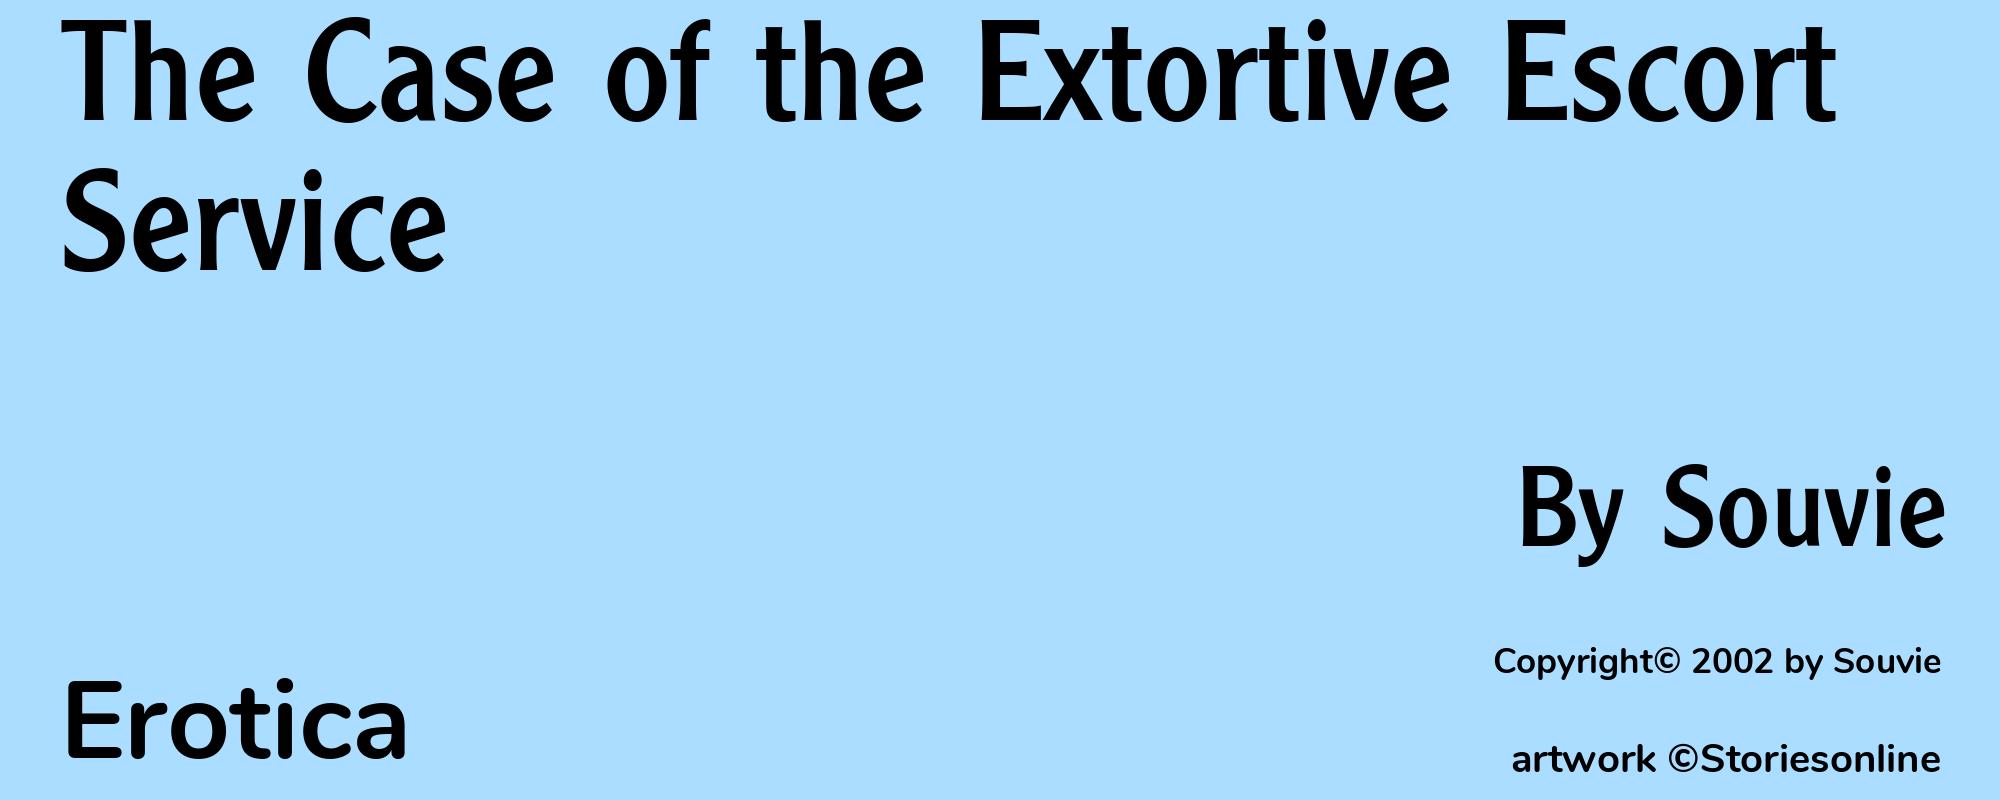 The Case of the Extortive Escort Service - Cover